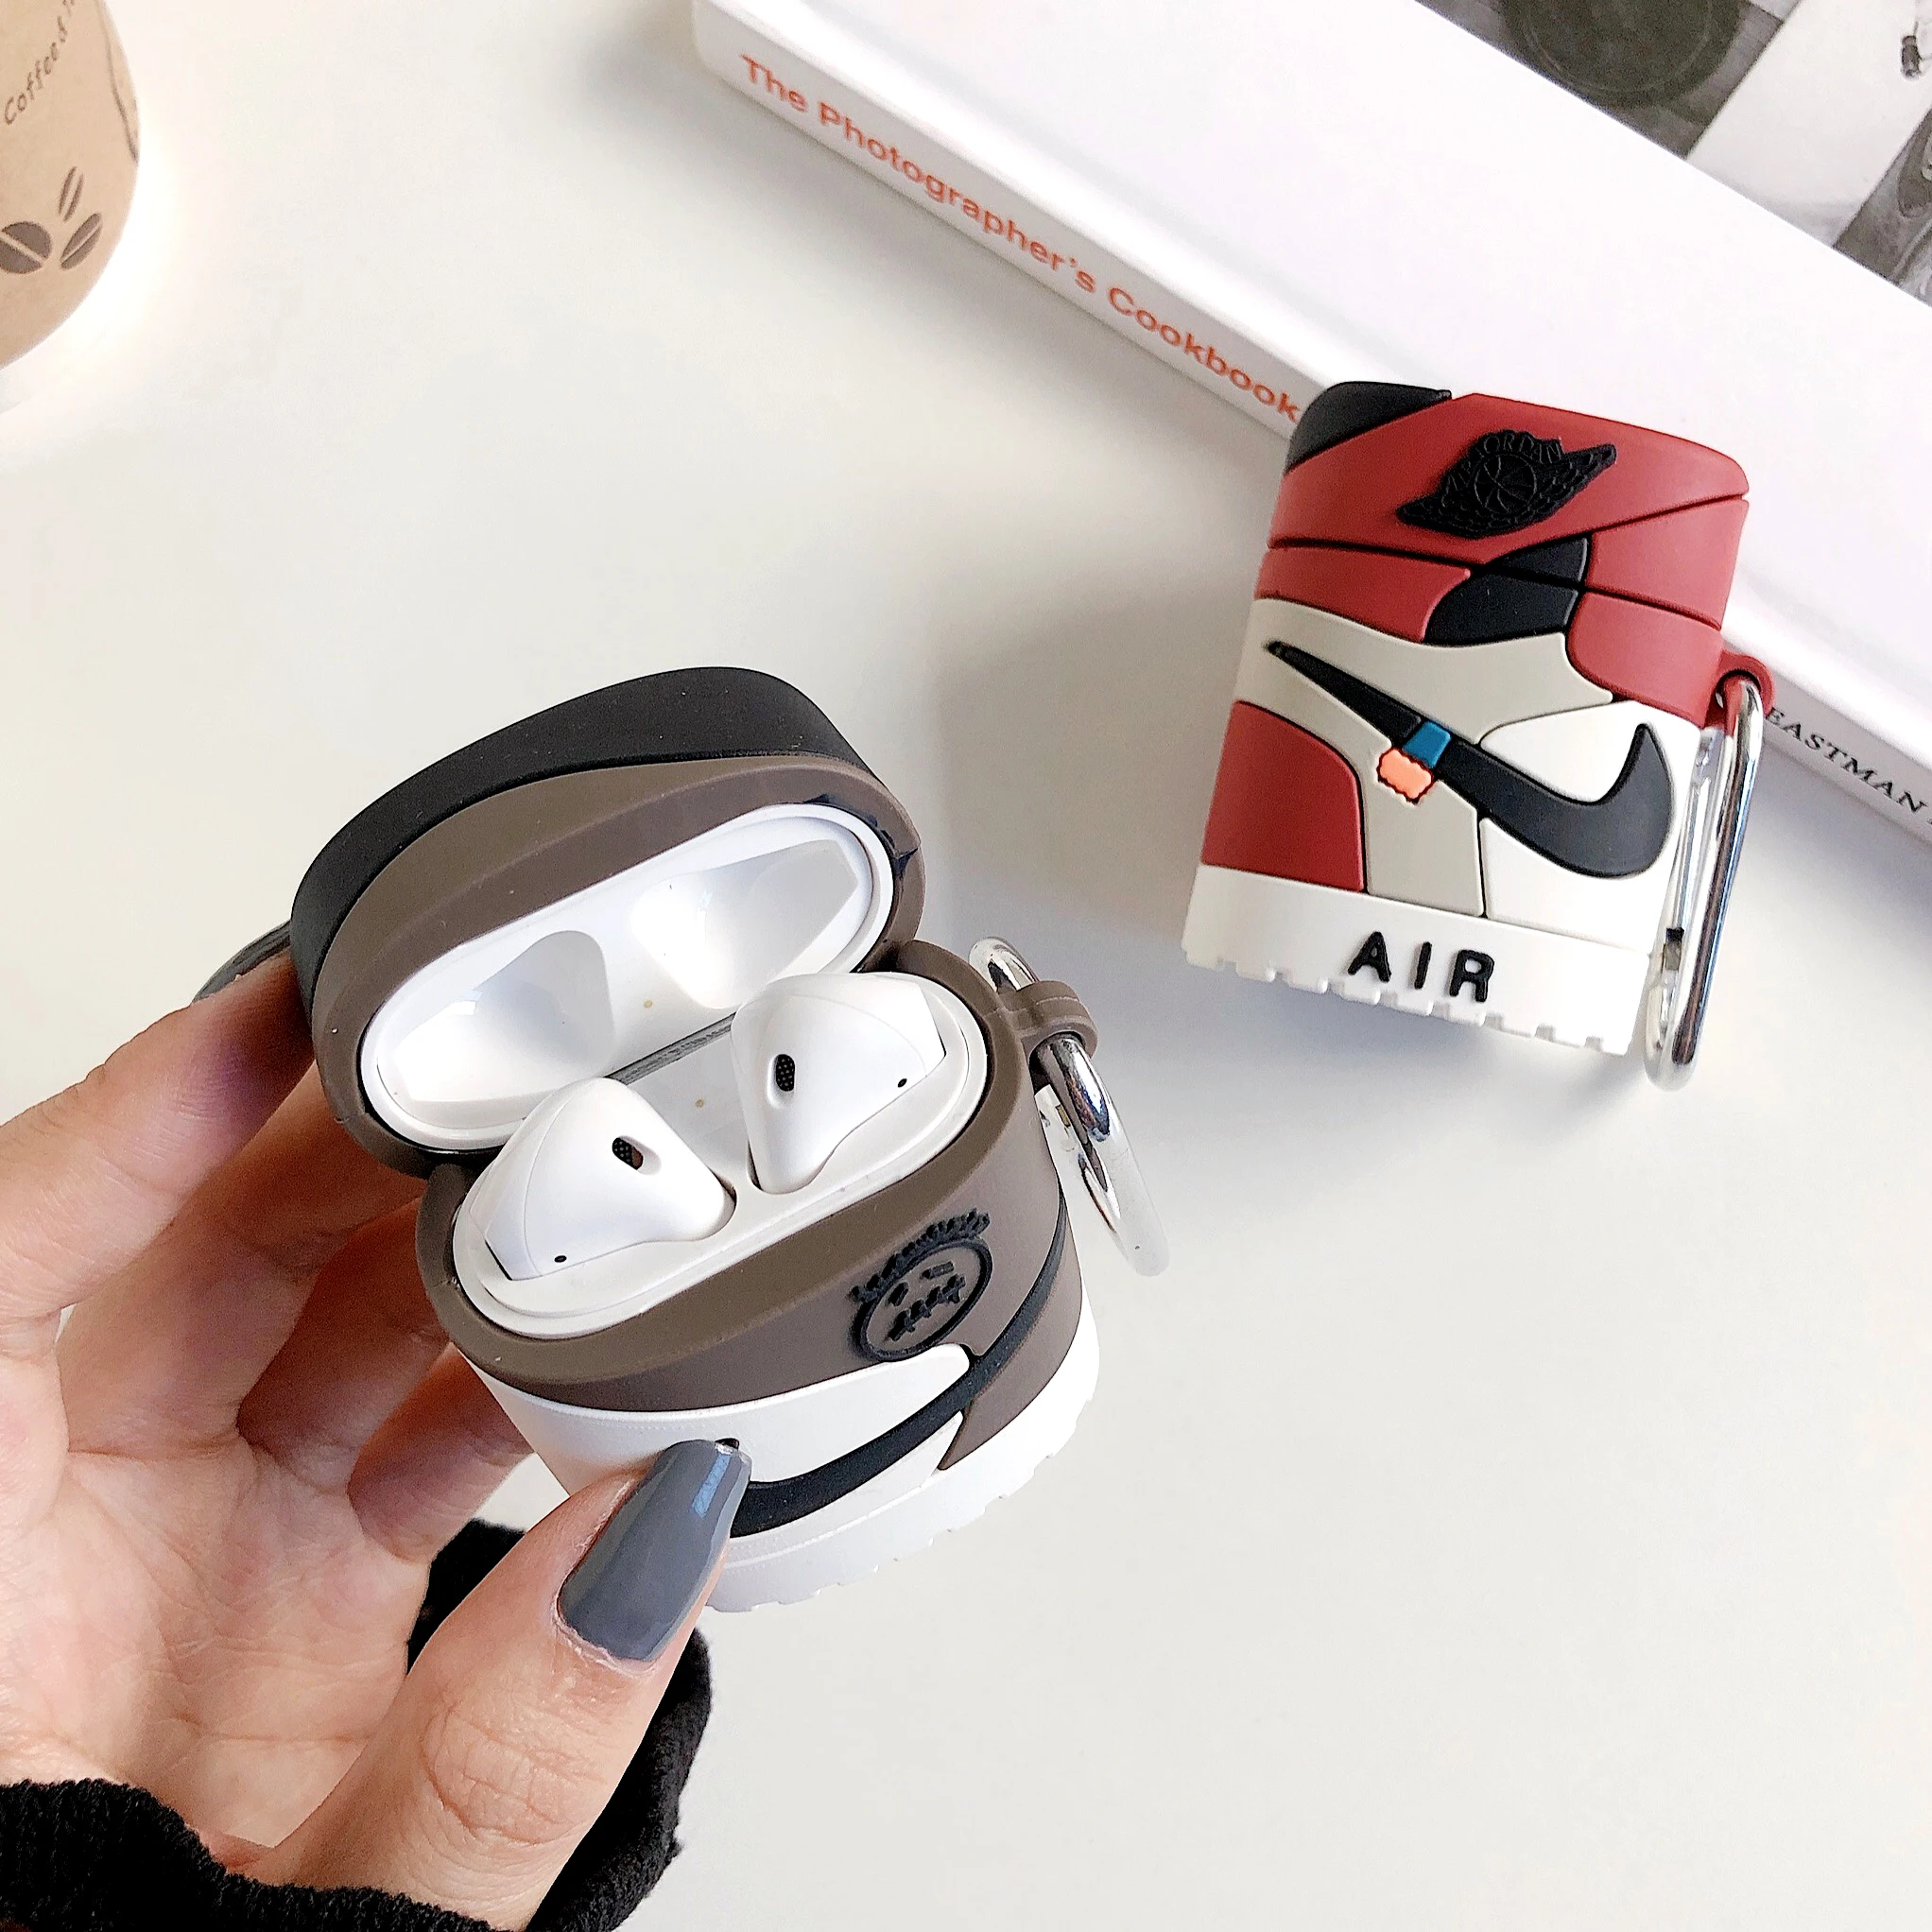 New Aj Ow Shoe Grimace Travis Scott Silicone Airpod Case For Airpods 1 ...